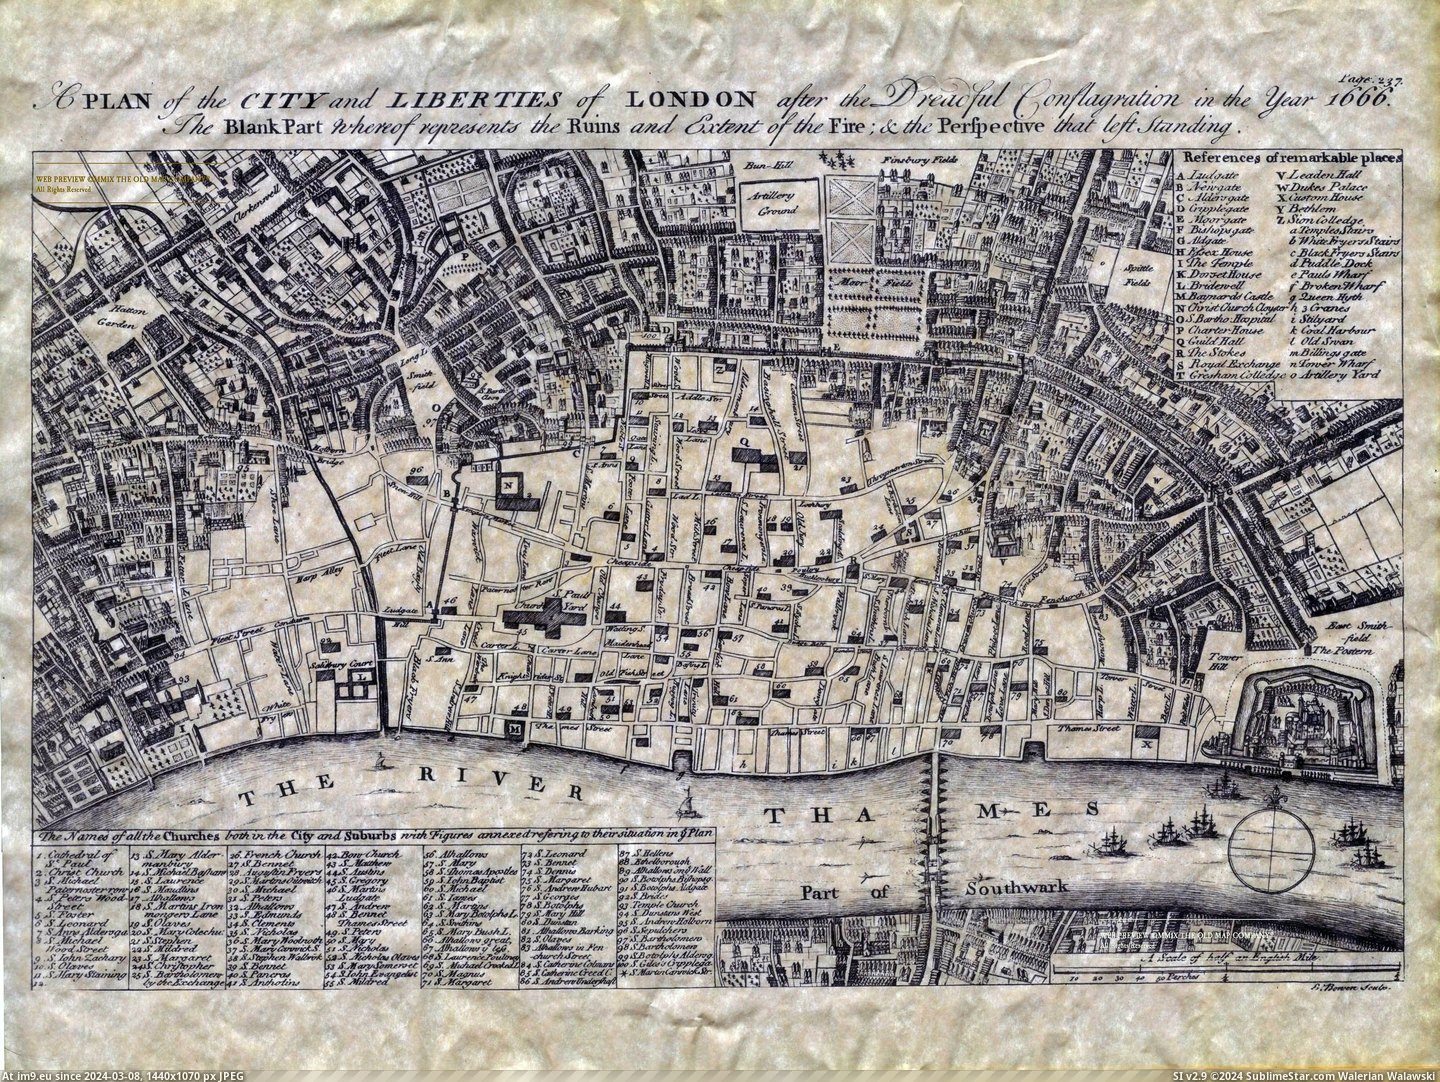 #Great #Map #Result #Damage #Detailing #Fire #London [Mapporn] 1666 Map of London detailing the damage suffered as a result of The Great Fire [3500x2613] Pic. (Image of album My r/MAPS favs))